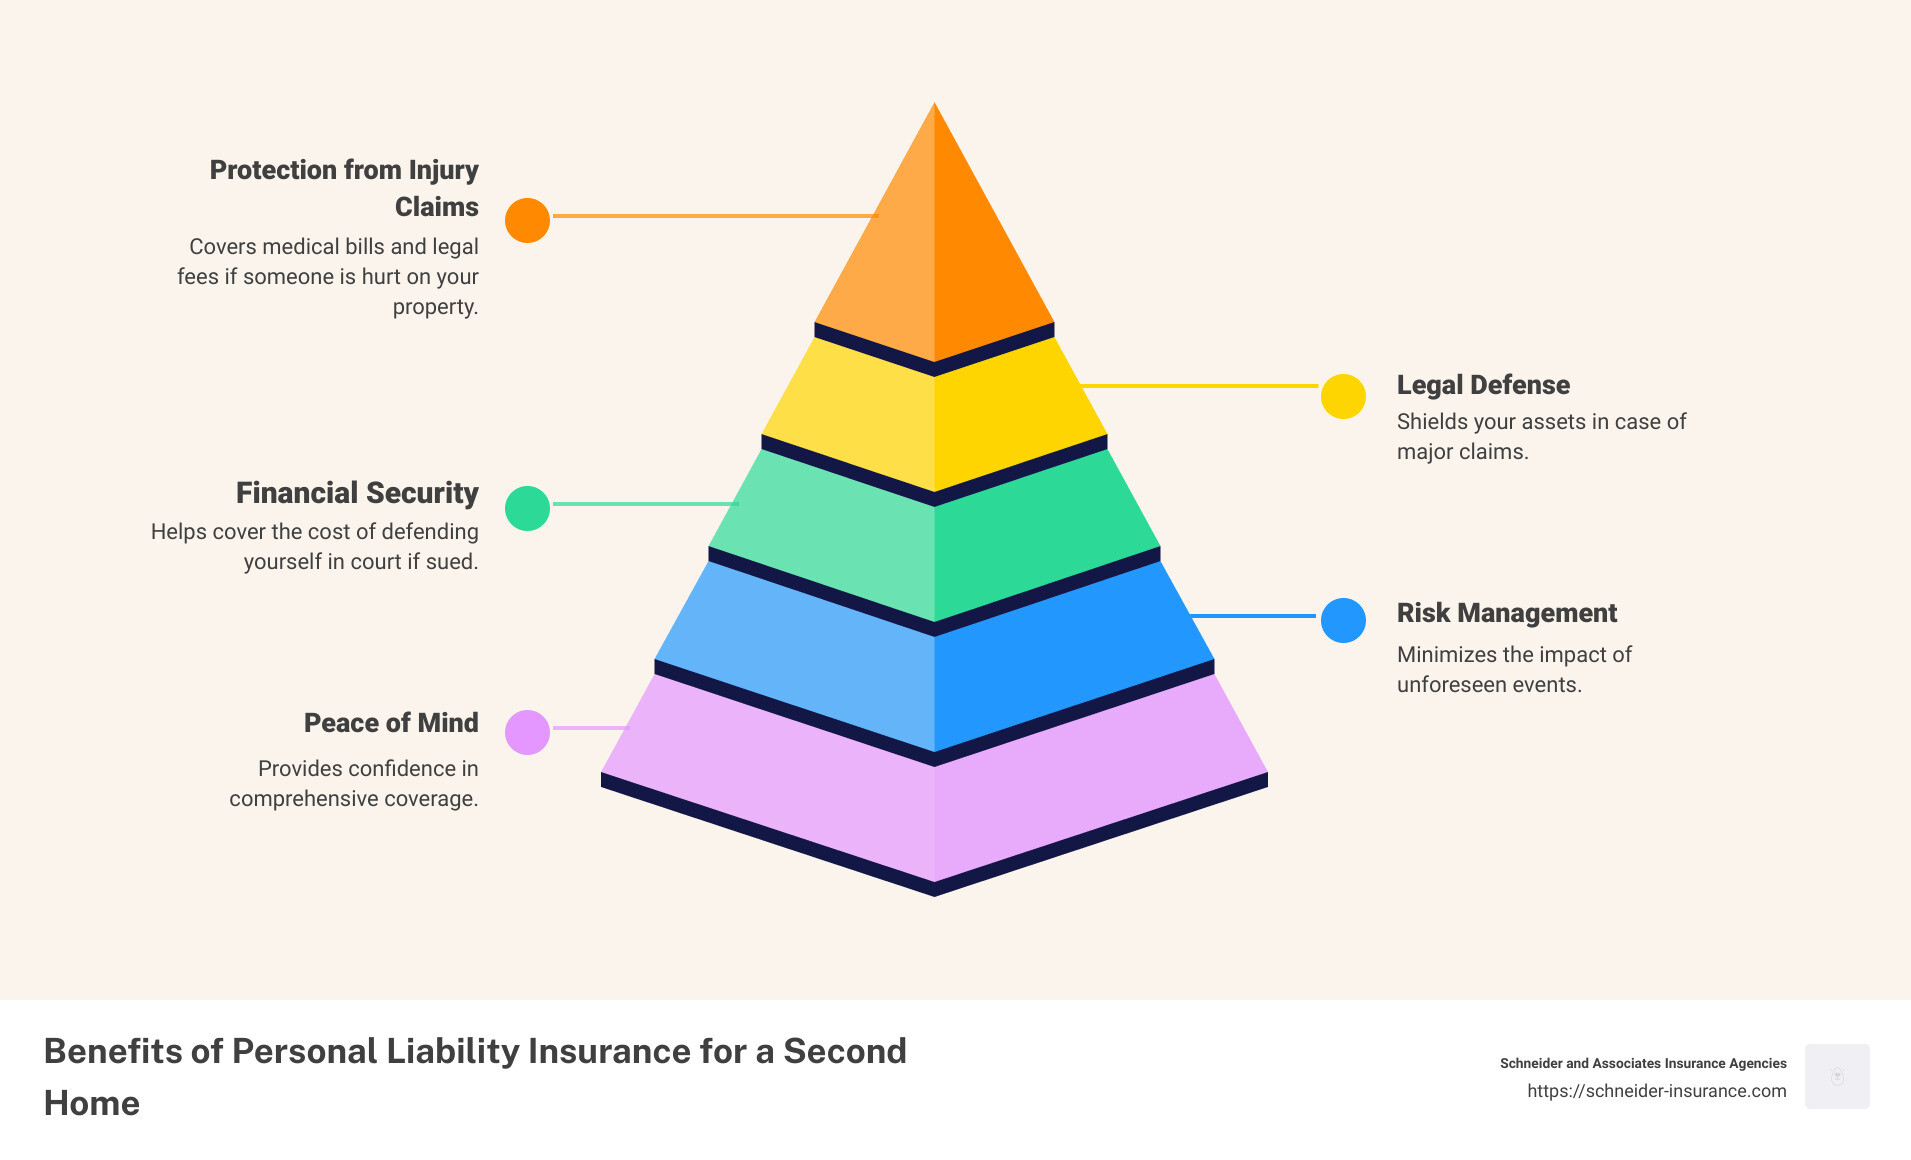 second home insurance coverage infographic - do i need personal liability insurance for a second home infographic pyramid-hierarchy-5-steps